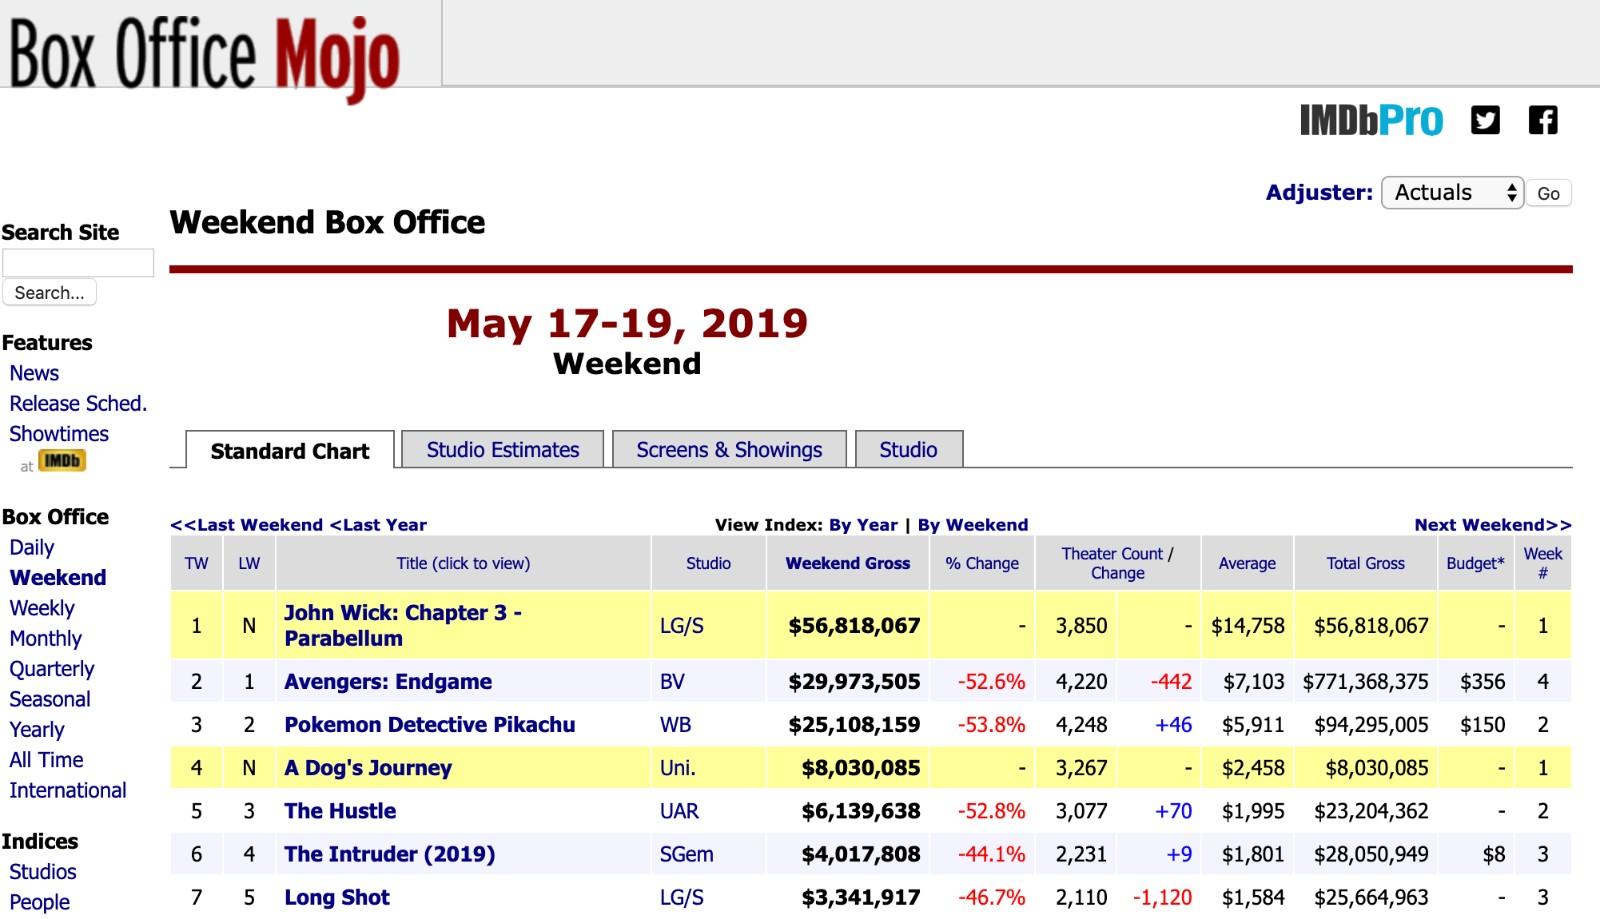 A New Box Office Mojo is Being Rebuilt by the Community